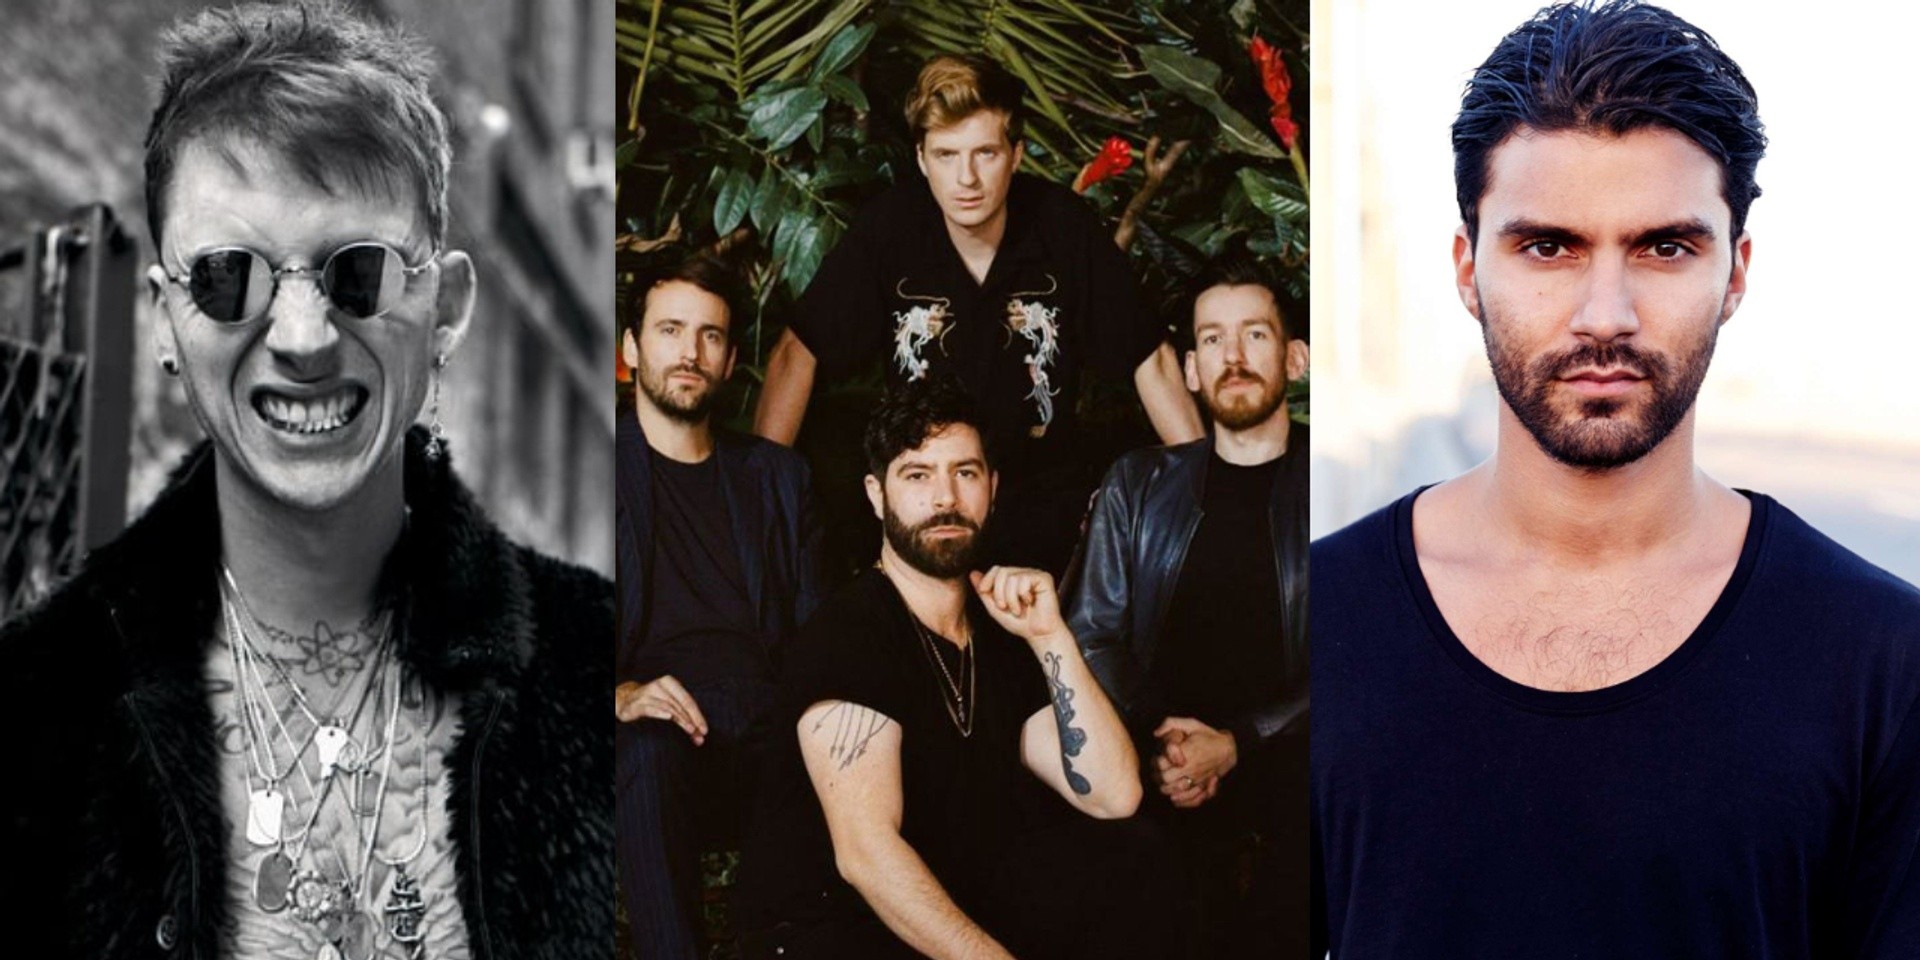 Summer Sonic adds more acts to line-up – Machine Gun Kelly, Foals, R3HAB and more confirmed 